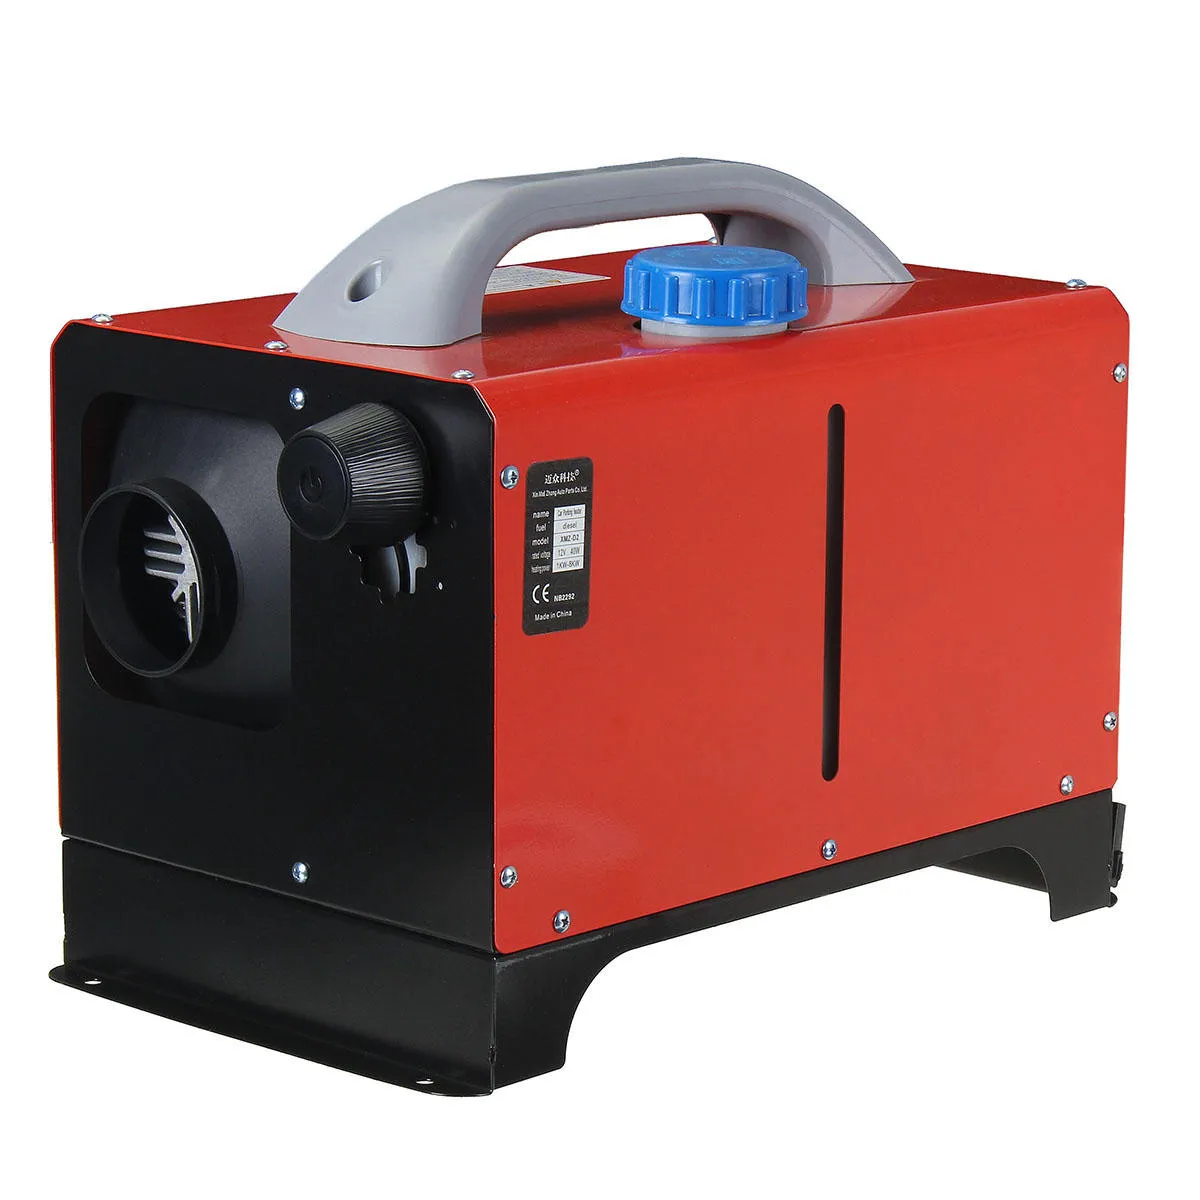 12V 8KW Red Diesel Air Blower Heater Price With Automatic Room